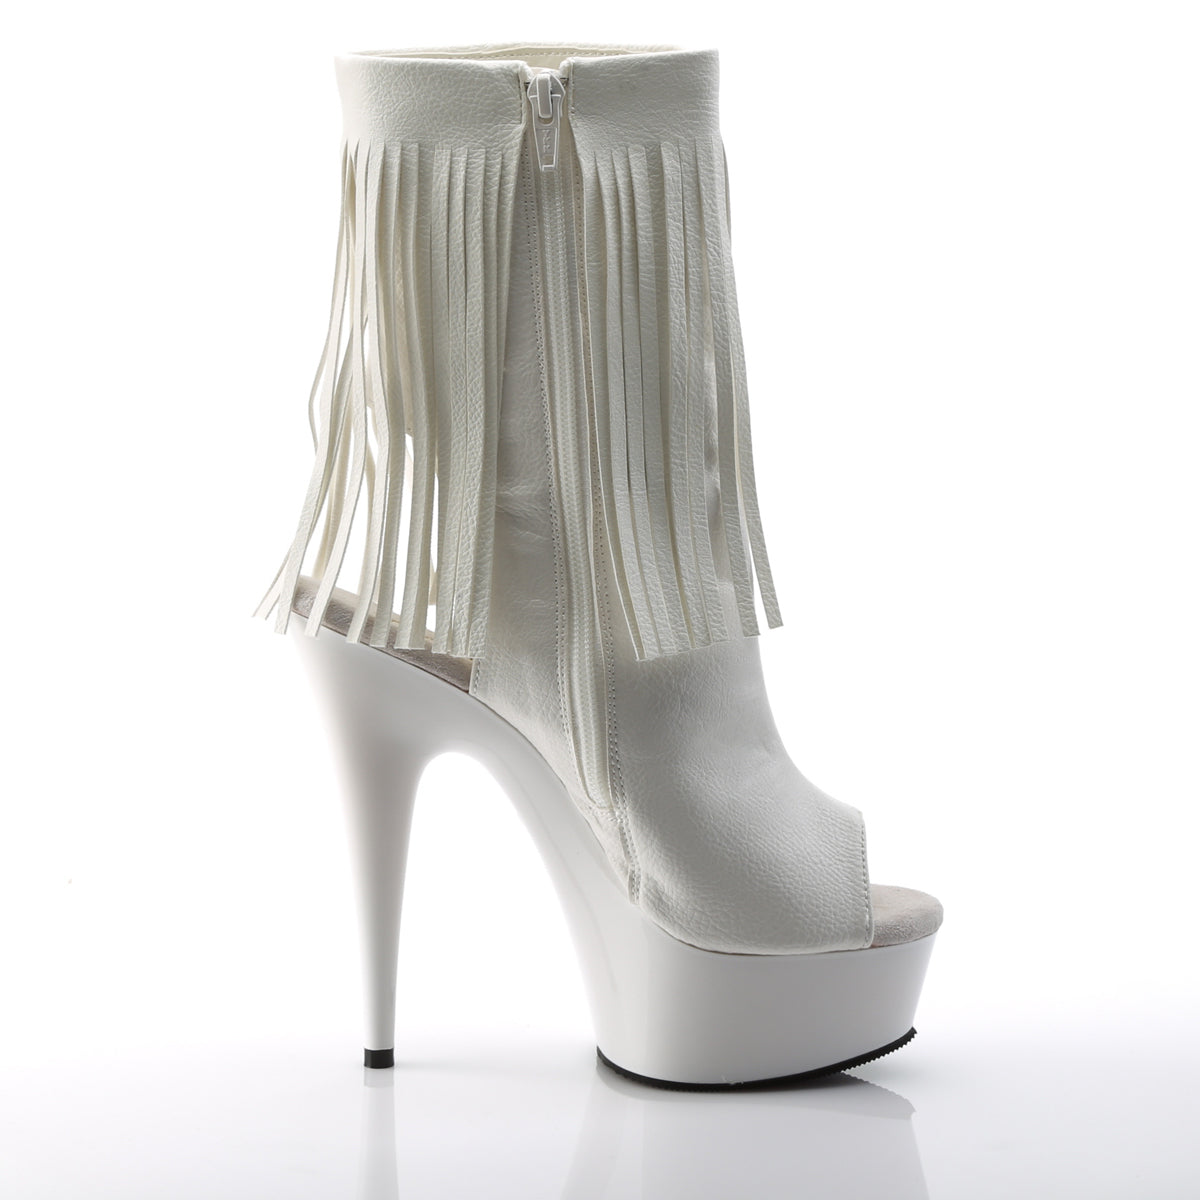 Pleaser Womens Ankle Boots DELIGHT-1019 Wht Faux Leather/Wht